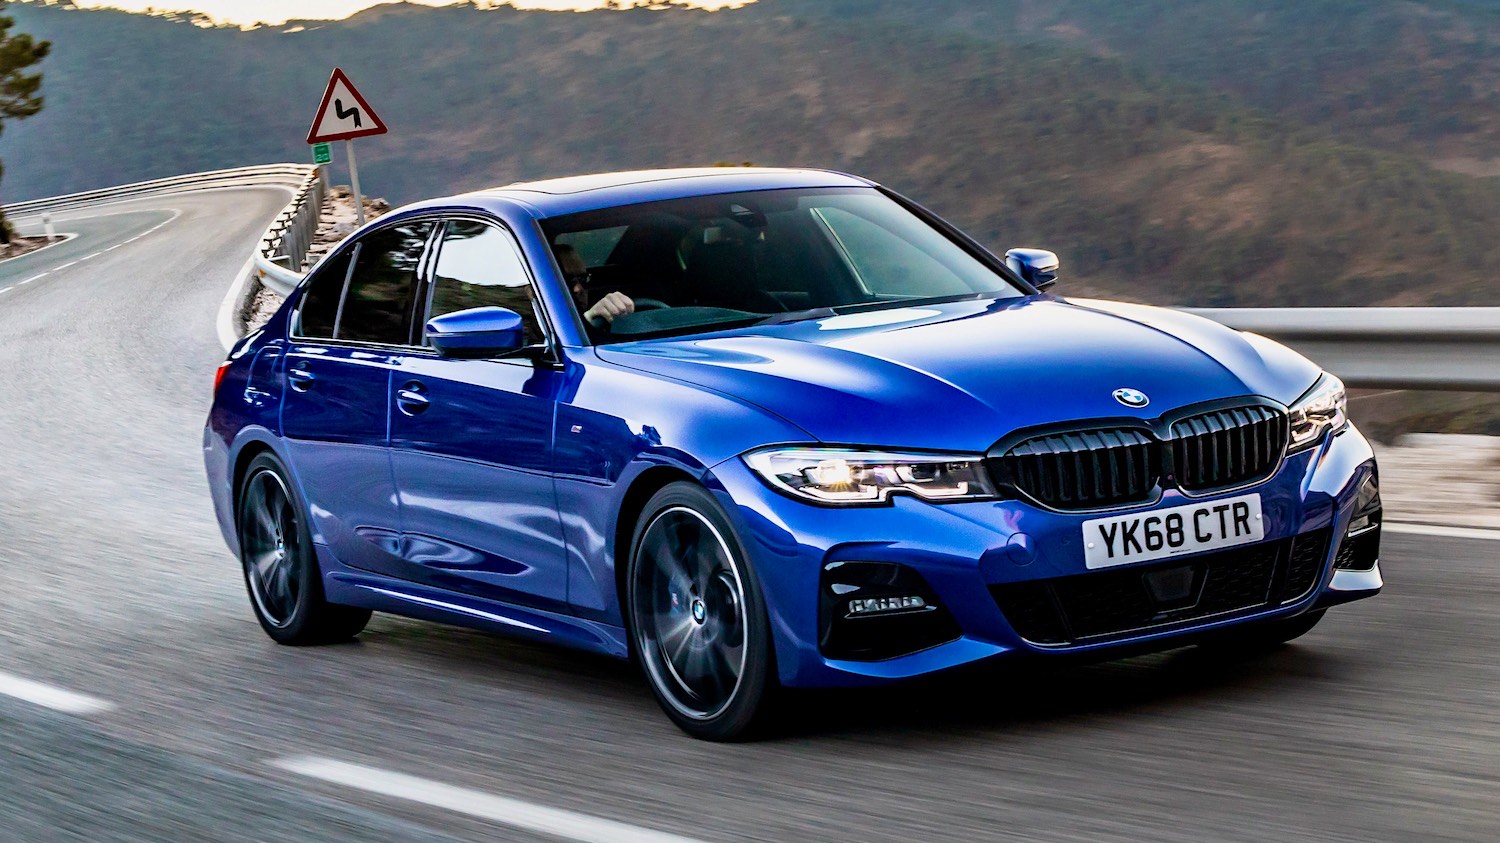 Drive.co.uk Reviewed BMW 3 Series M Sport, Perfecto